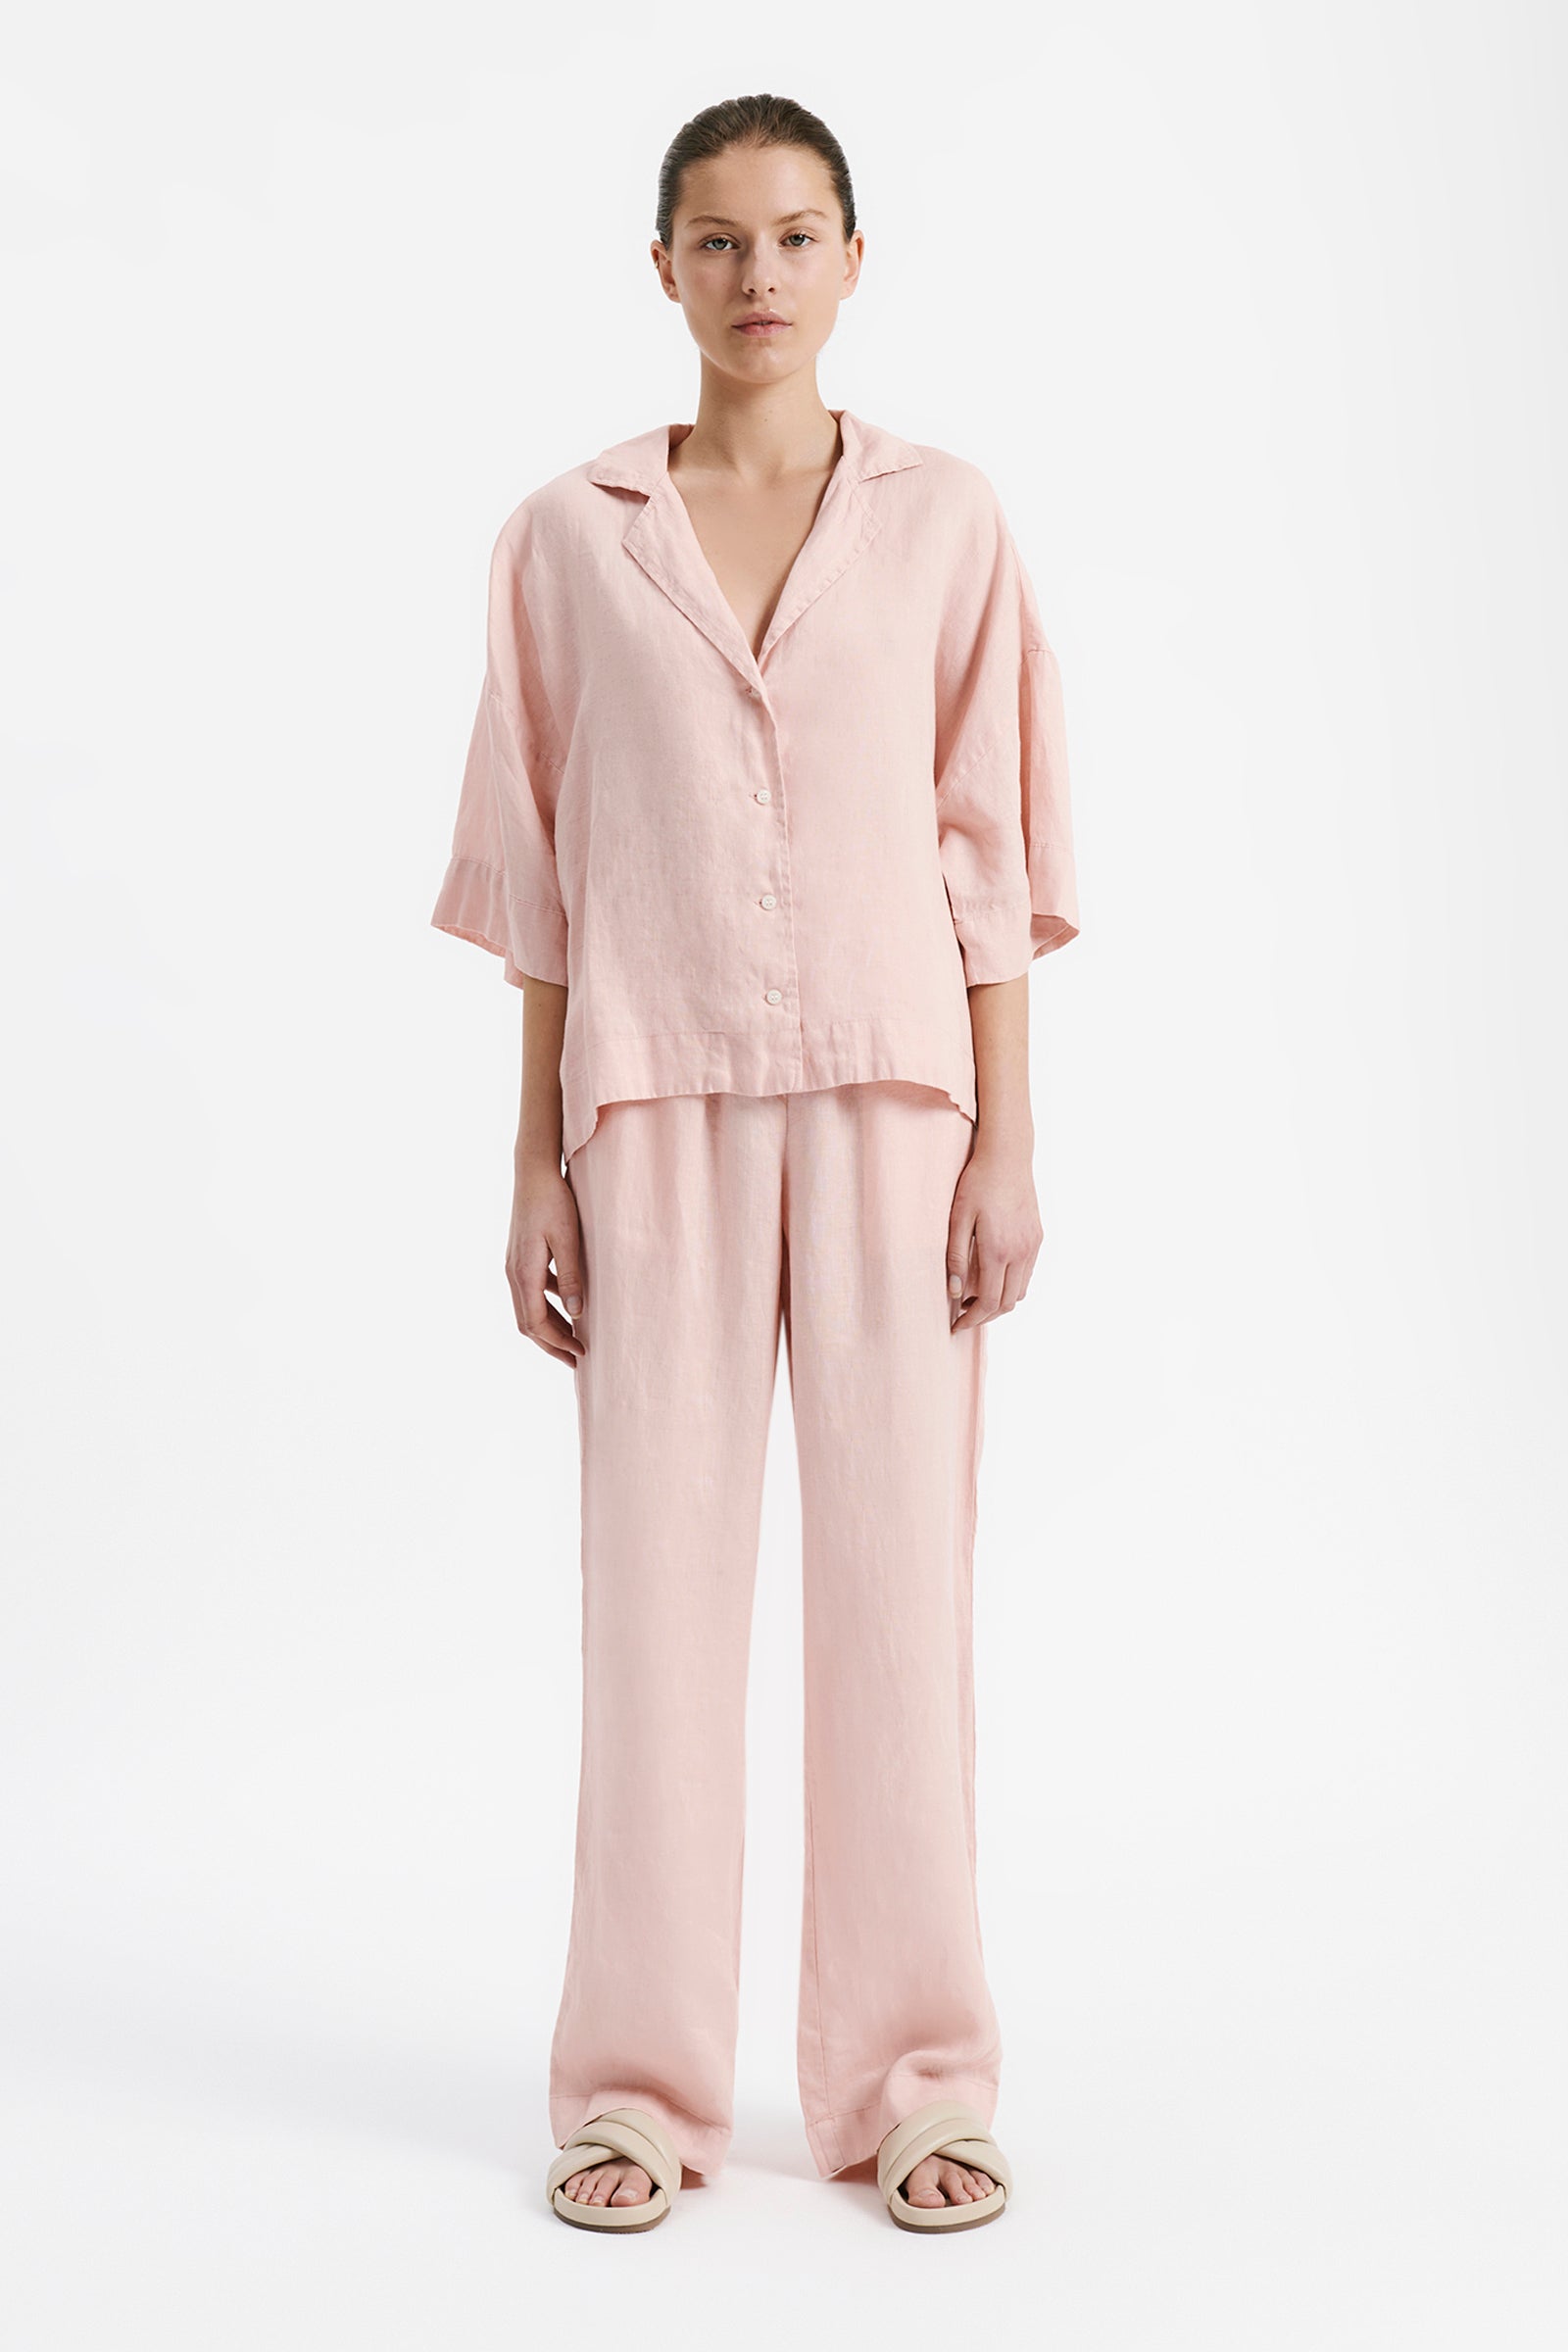 Nude Lucy Lounge Linen Pant In A Light Pink Guava Colour 